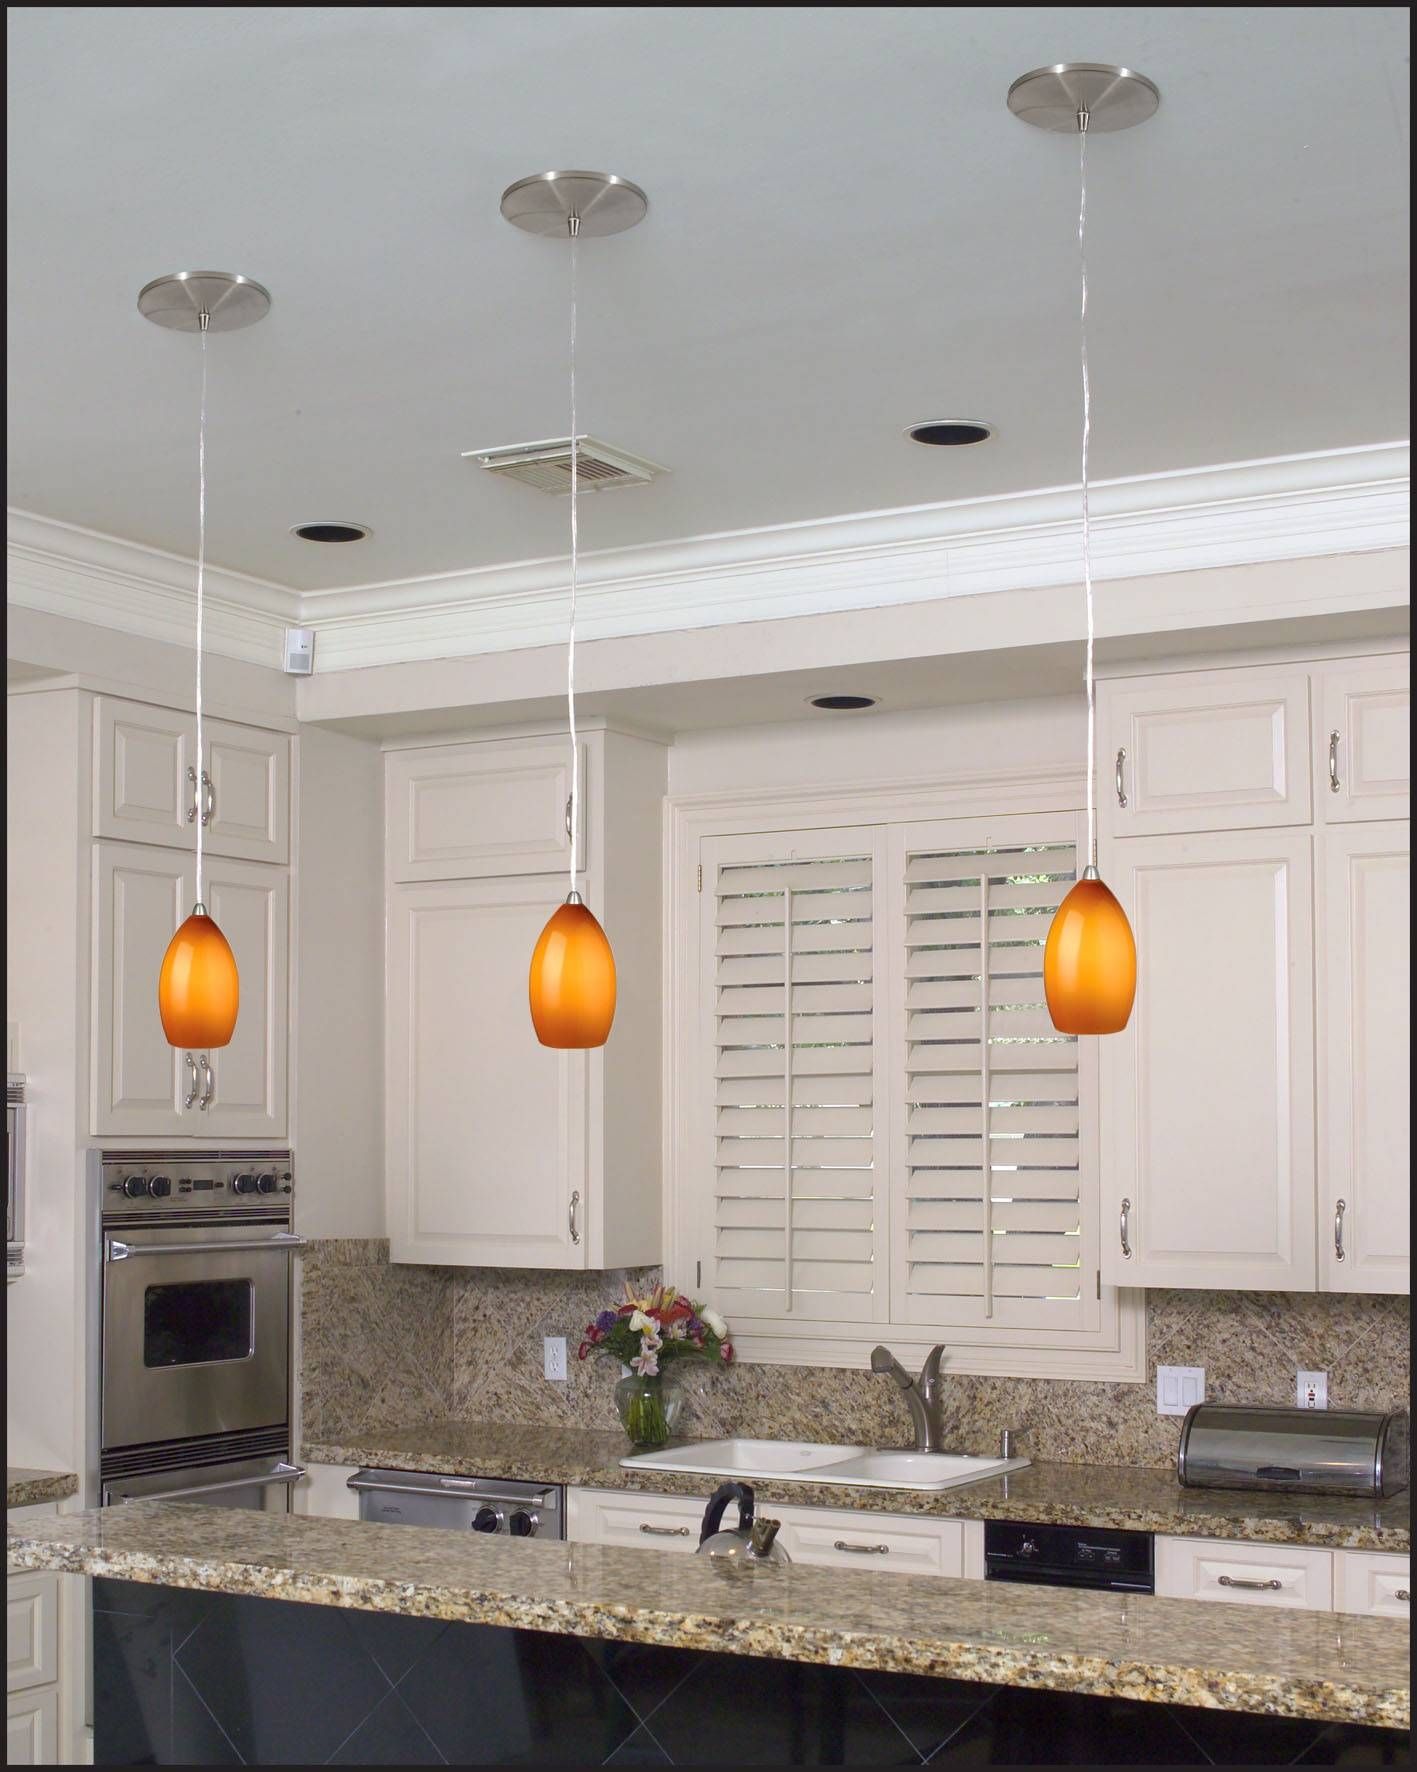 Convert A Recessed Light To A Pendant | Tribune Content Agency Throughout Recessed Lights To Pendant (View 15 of 15)